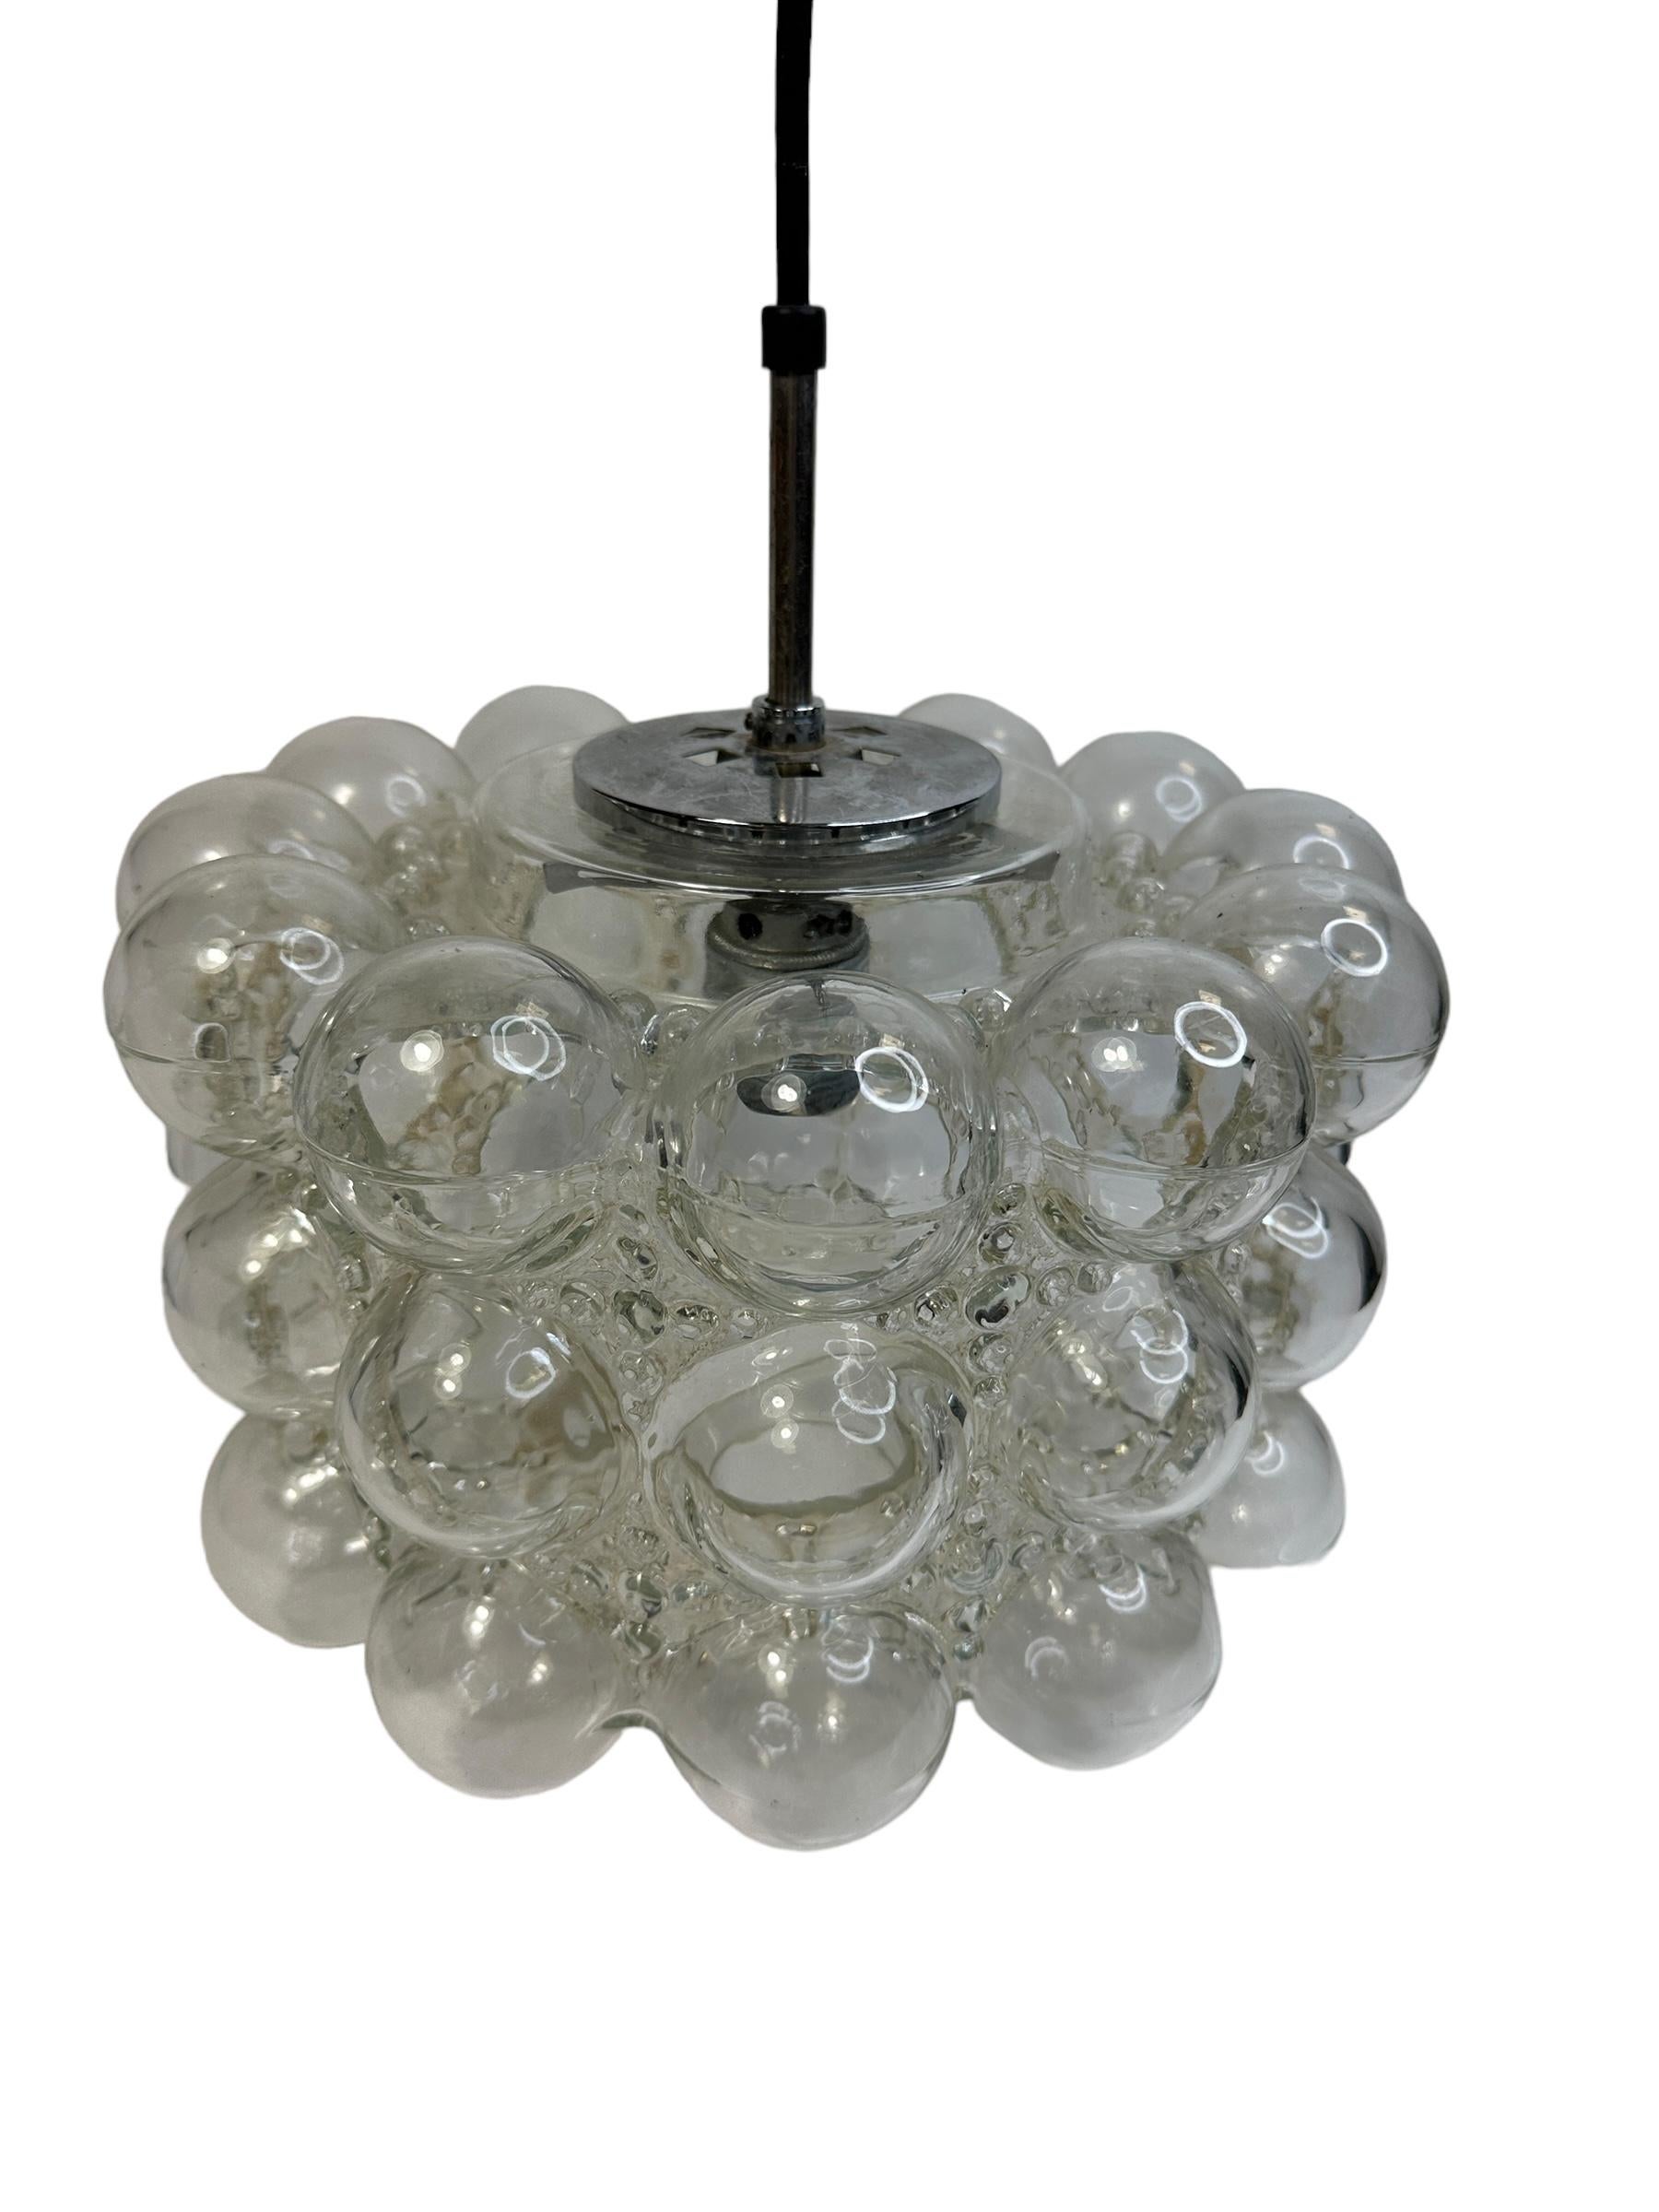 A stunning bubble glass pendant designed by Helena Tynell and Heinrich Gantenbrink for Glashütte Limburg, manufactured in Germany, circa 1960s. The Pendant requires one European E27 Edison bulb, up to 100 watts. A nice addition to any room. Found at